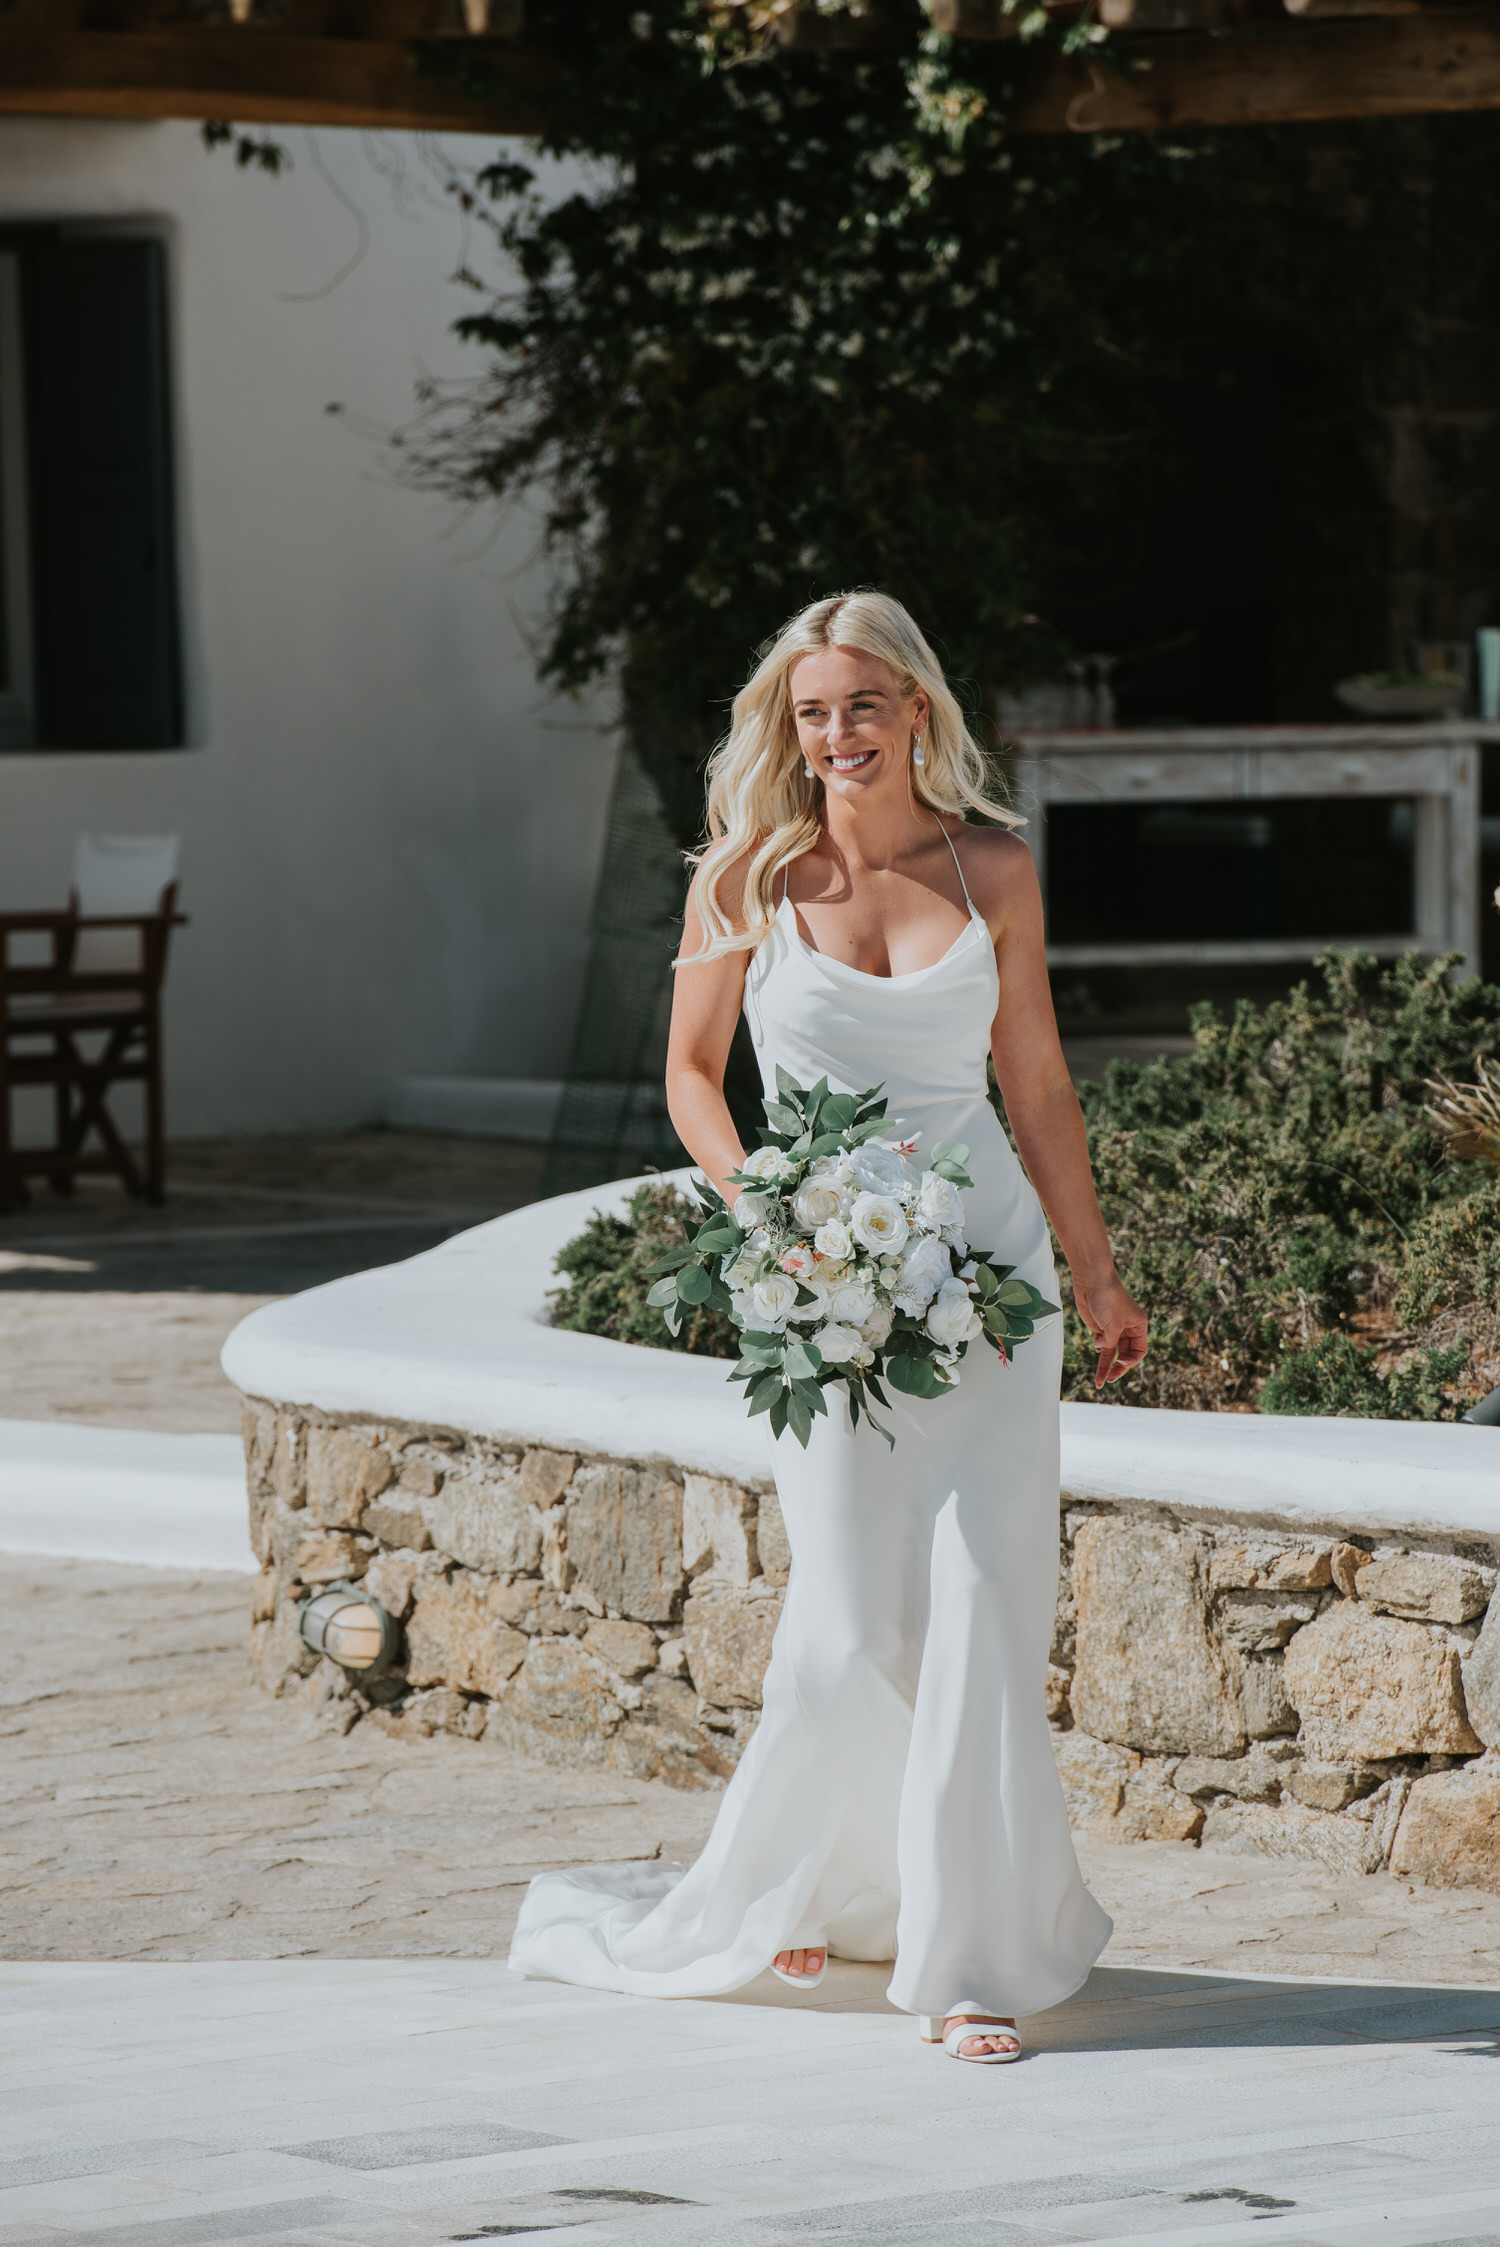 Mykonos wedding photographer: gorgeous bride walking with a wide smile on her face and the dress in the wind as she walks.